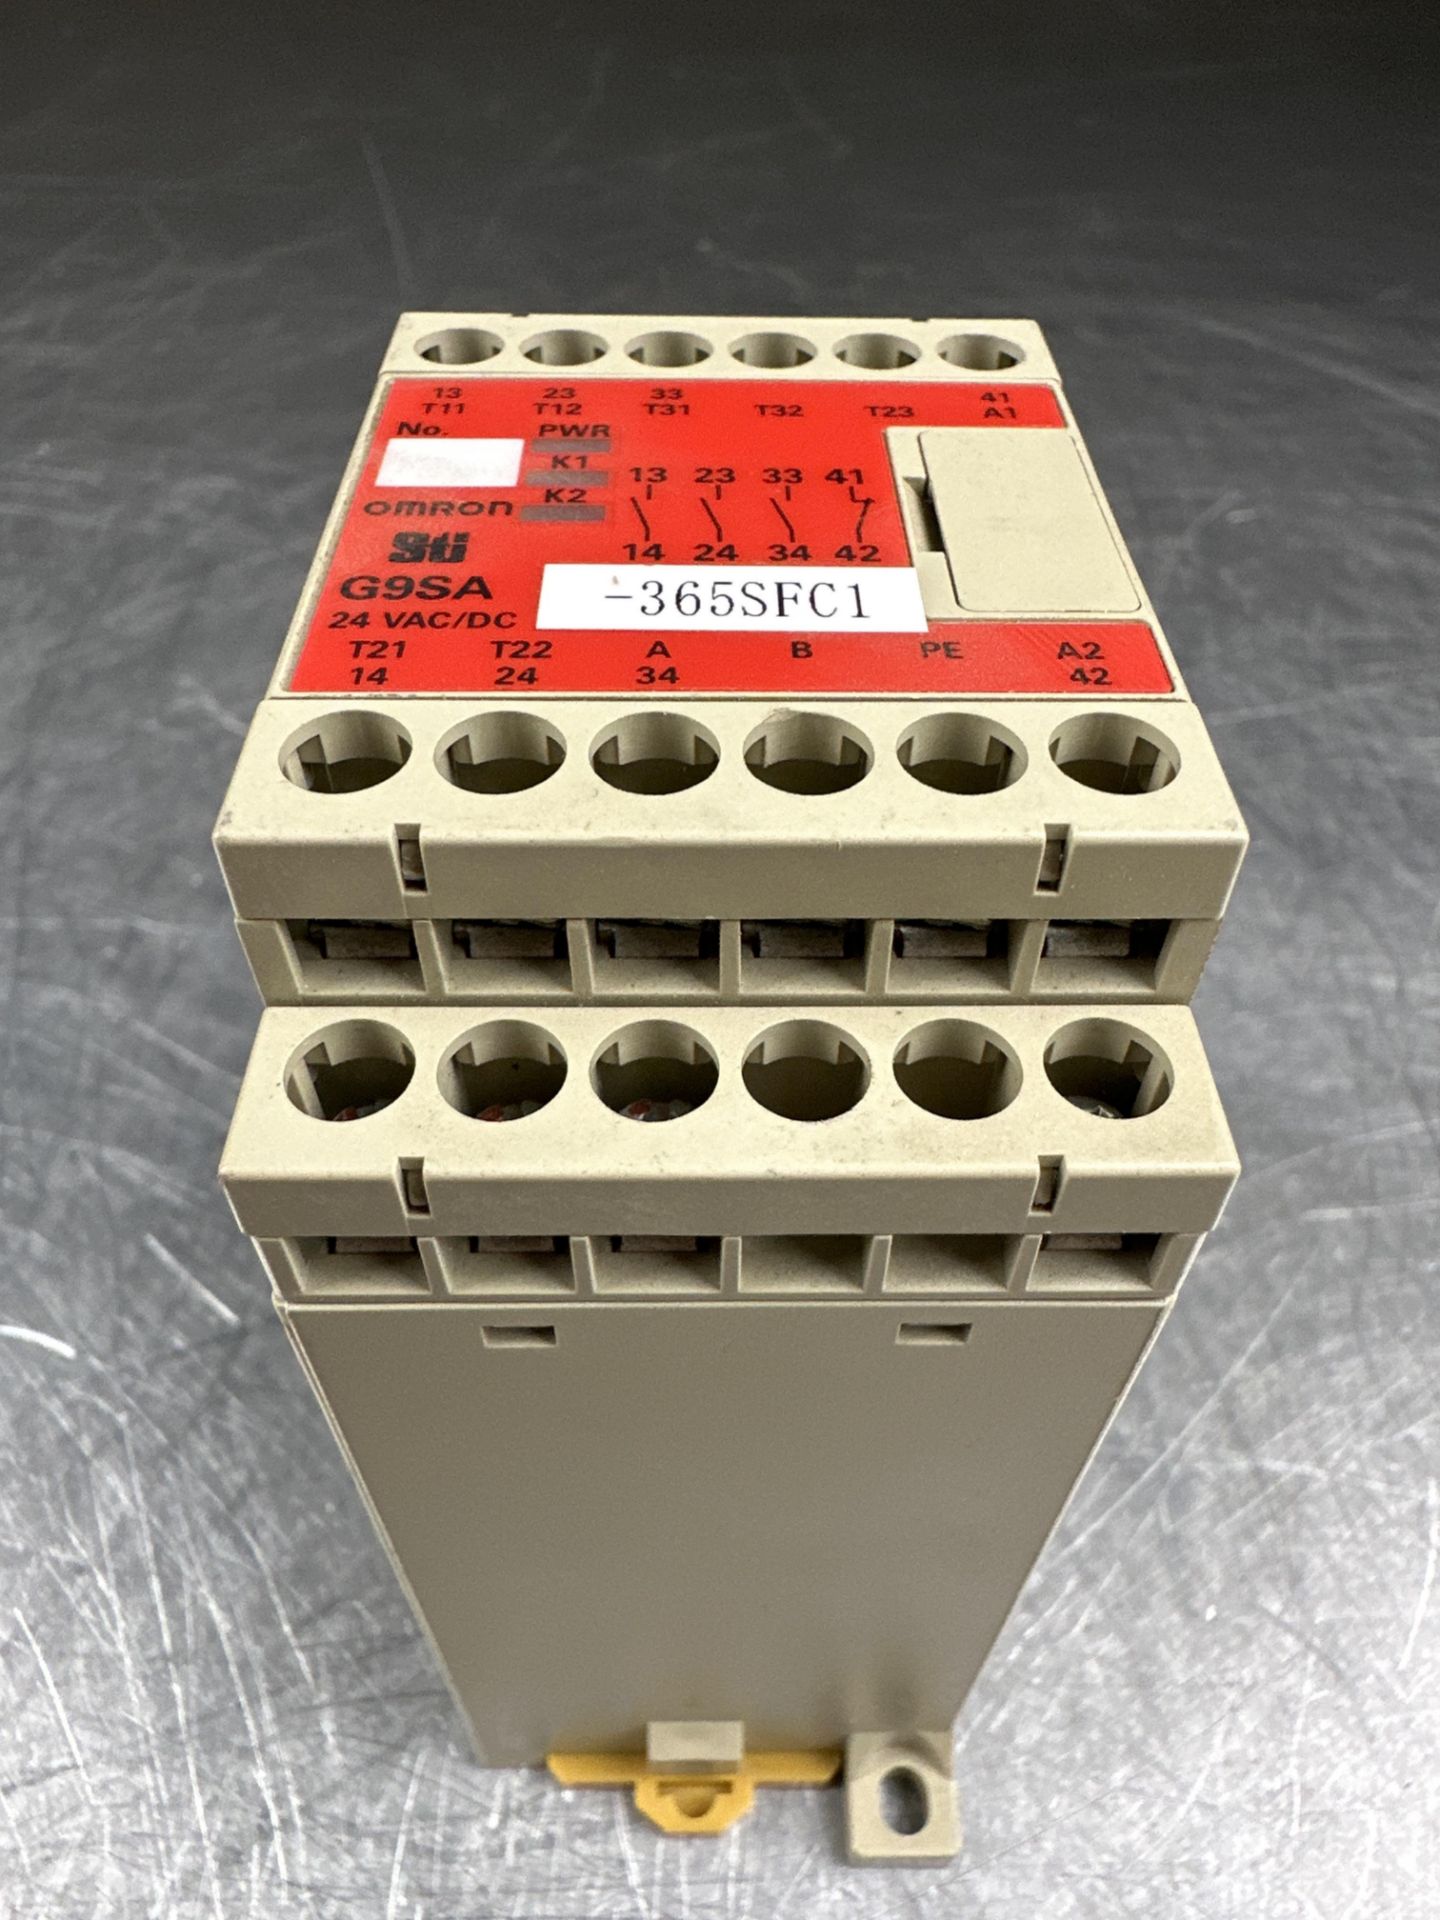 LOT OF 4 OMRON G9SA-301 SAFETY RELAYS - Image 3 of 6